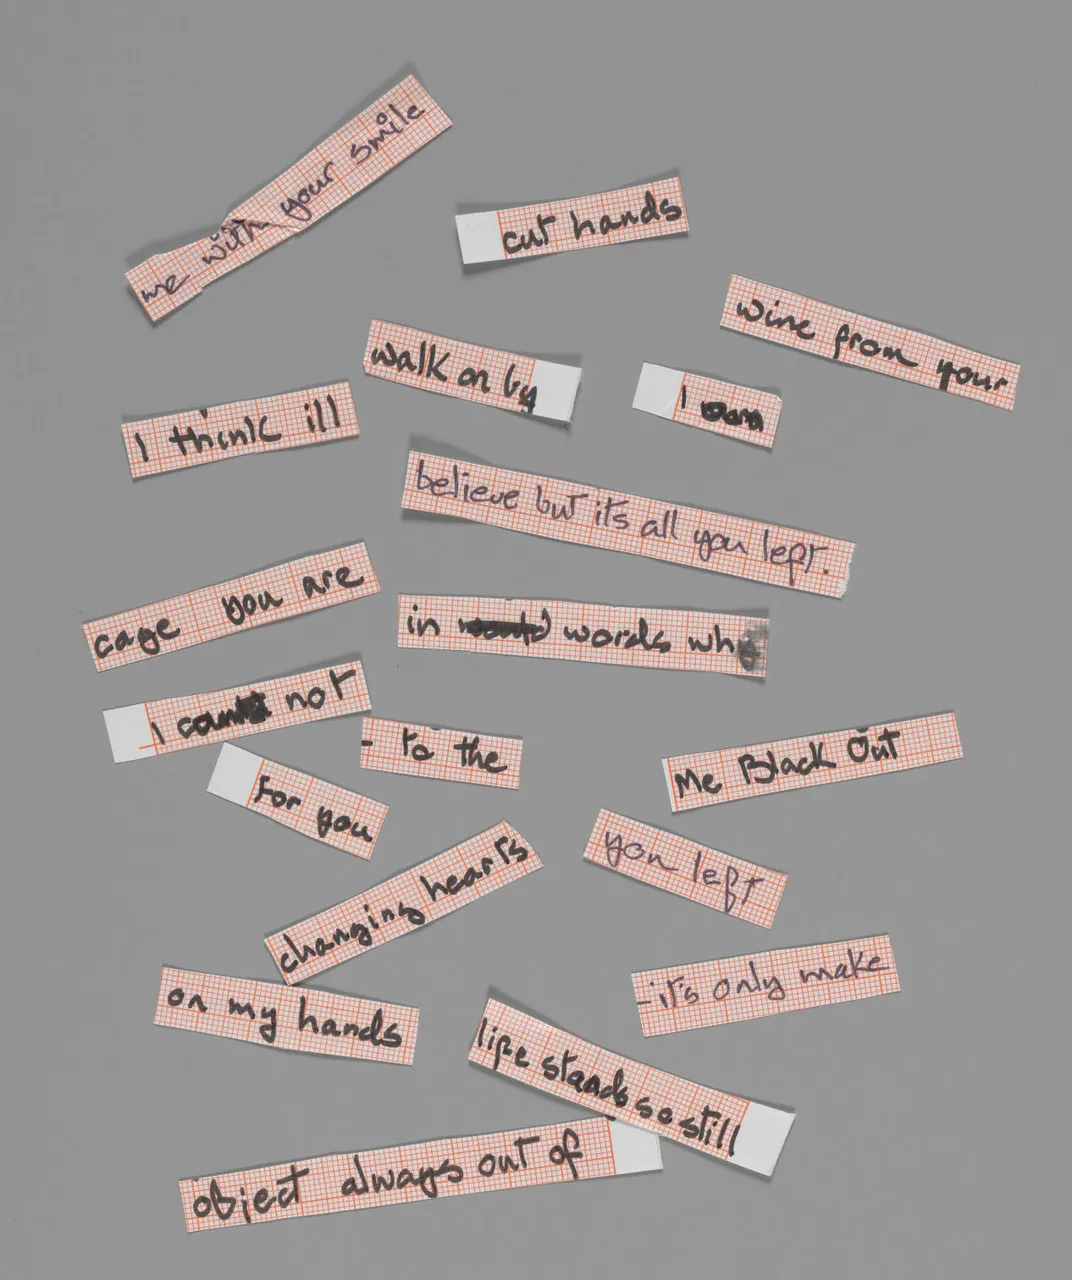 David Bowie's cut up lyrics for "Blackout" from Heroes (1977)